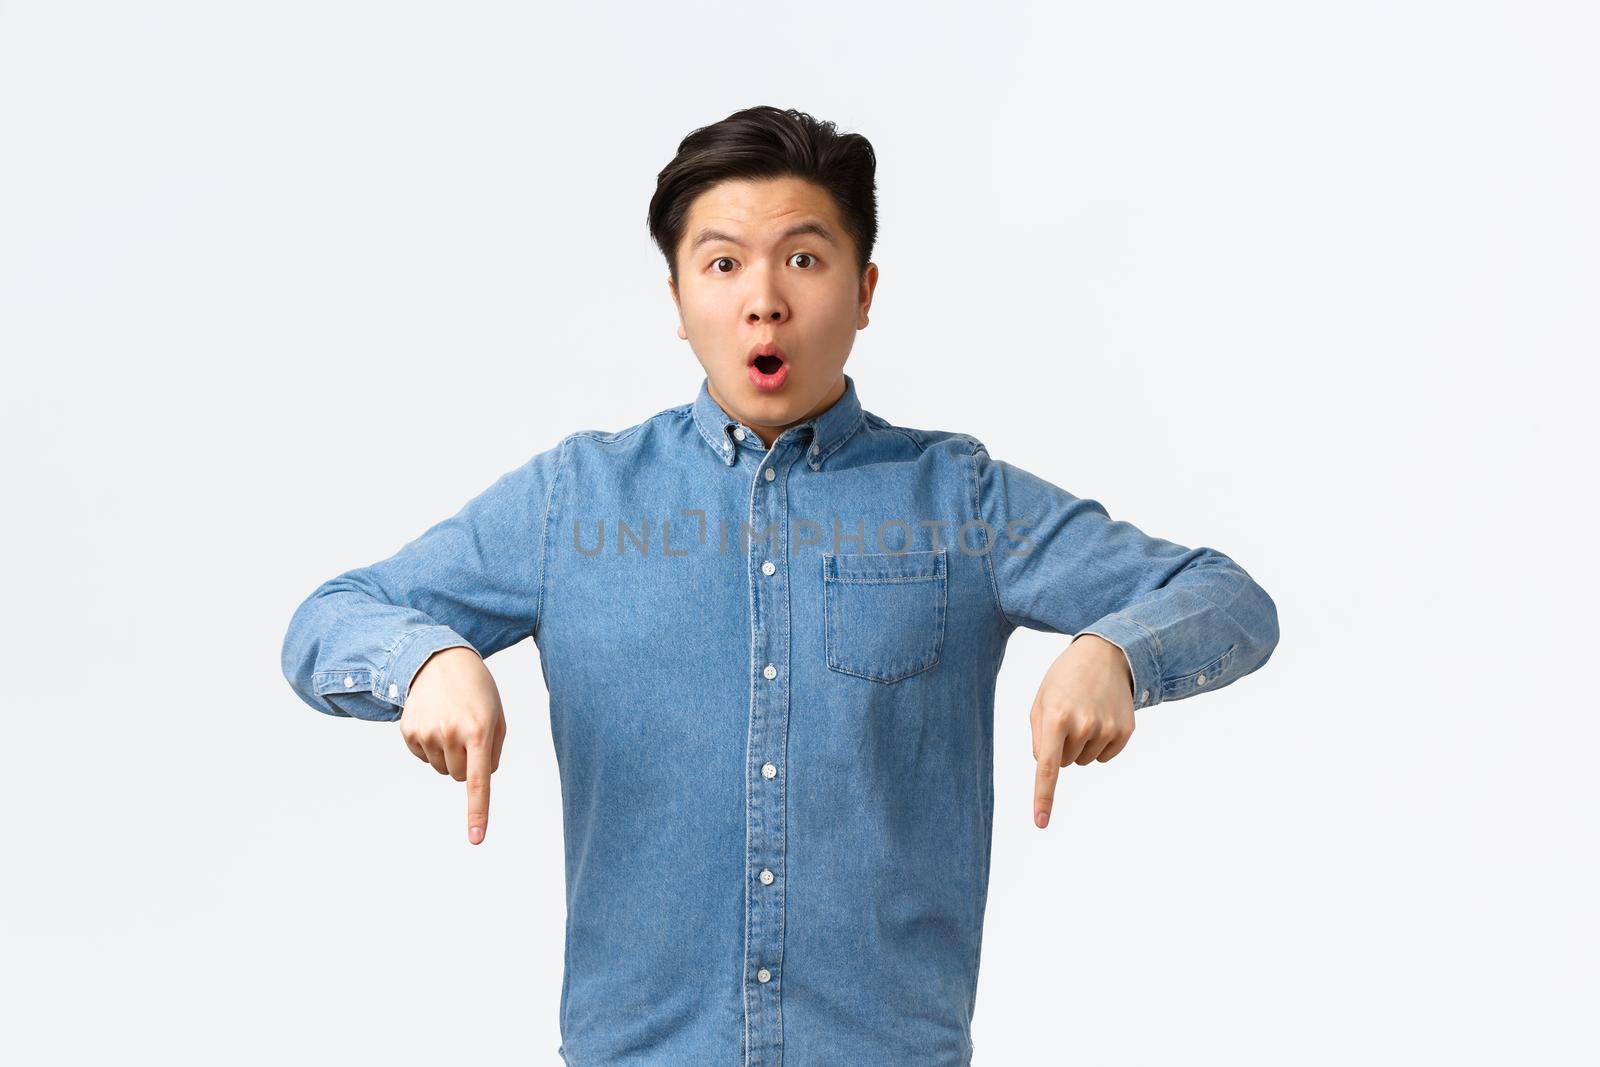 Shocked and impressed asian guy in blue shirt, pointing fingers down and looking at camera speechless, asking question about product, found something interesting, standing white background.